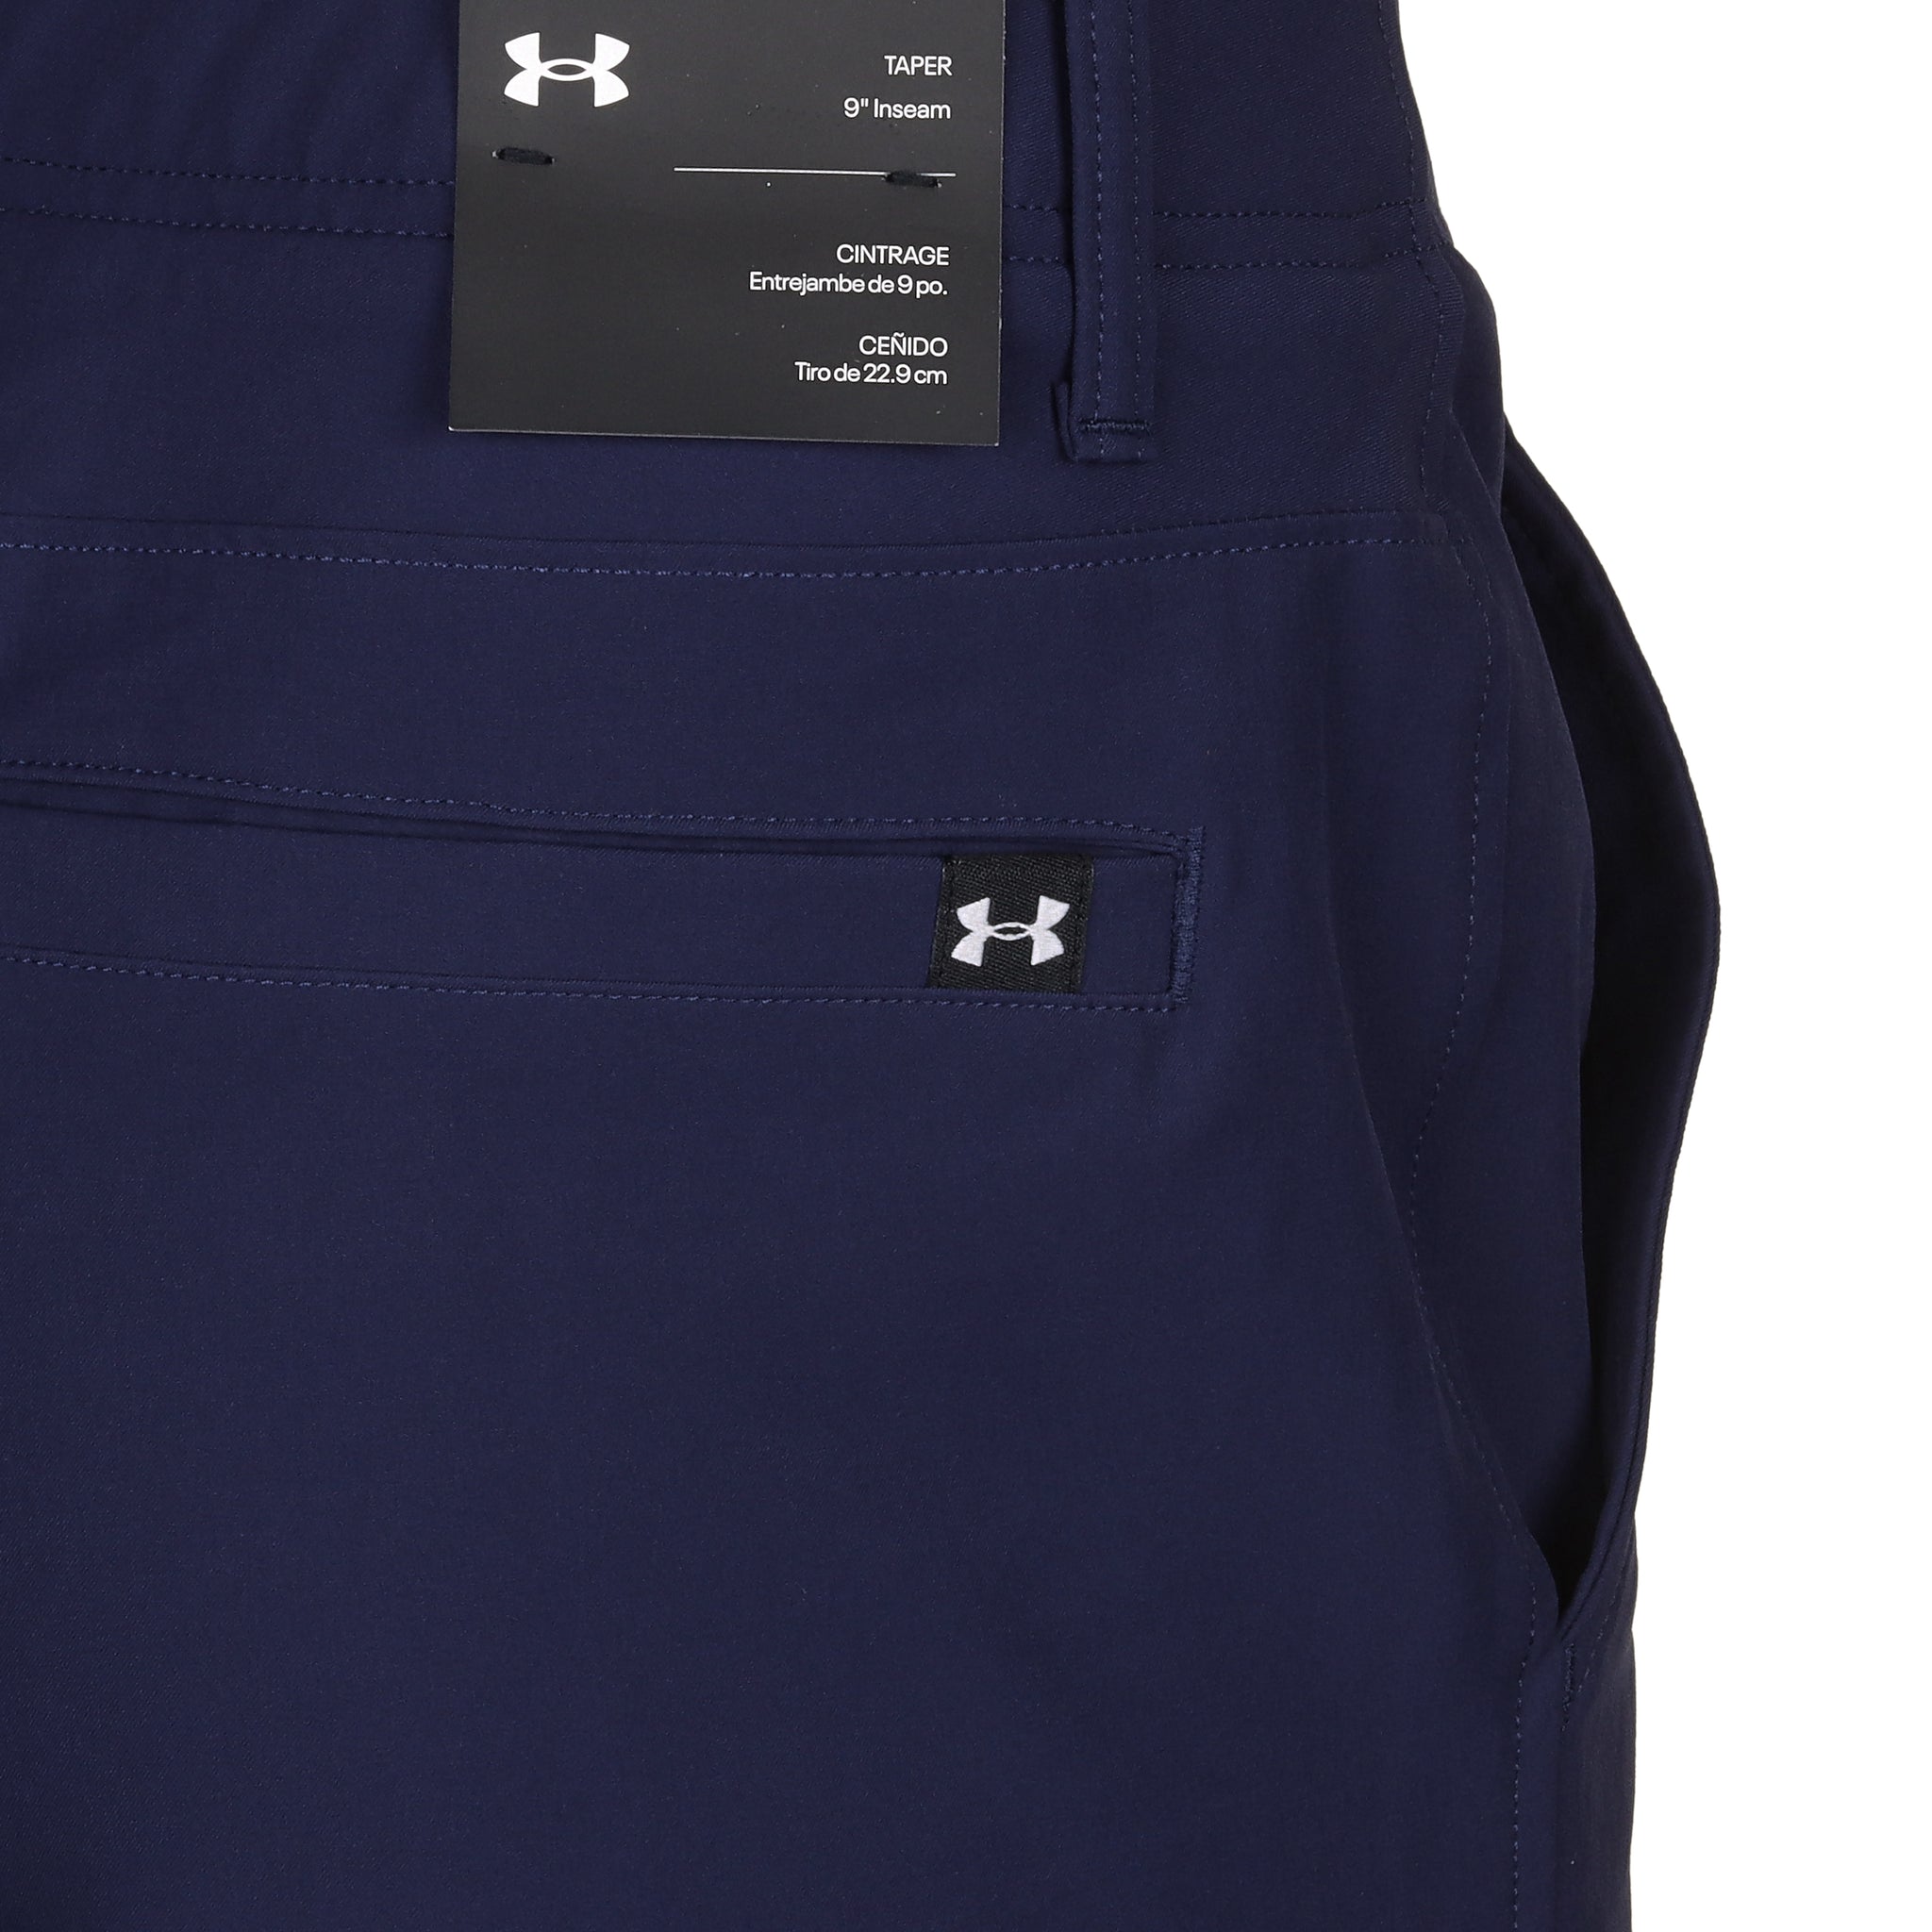 Under Armour Golf Drive Tapered Shorts 1384467 Midnight Navy 410 ...